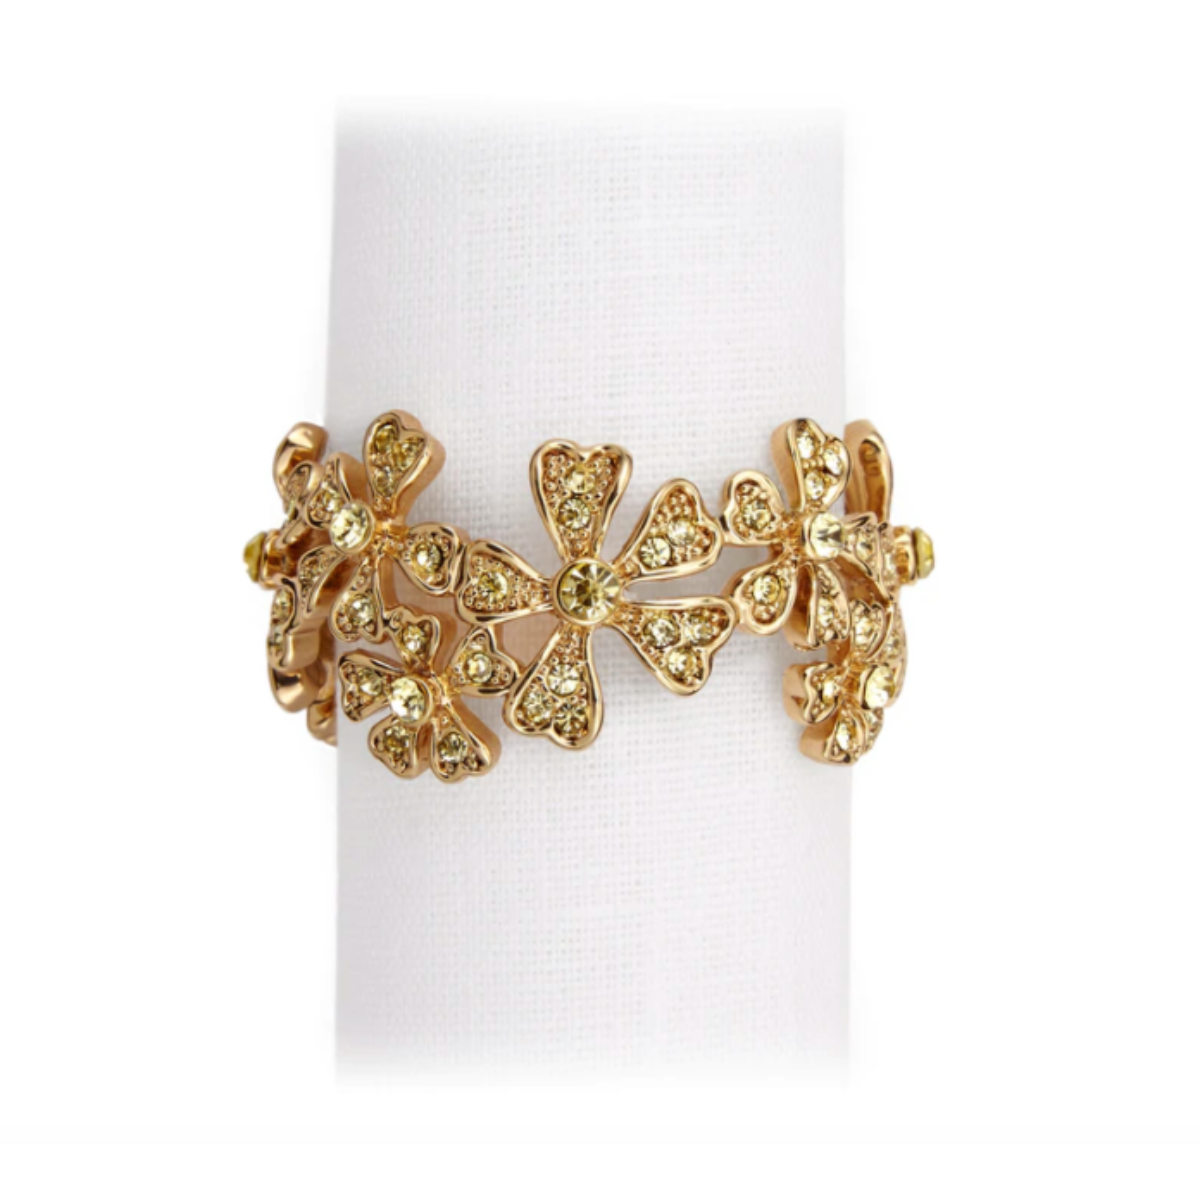 L’Objet I Garland Napkin Jewels | Yellow Crystal Plated Rings